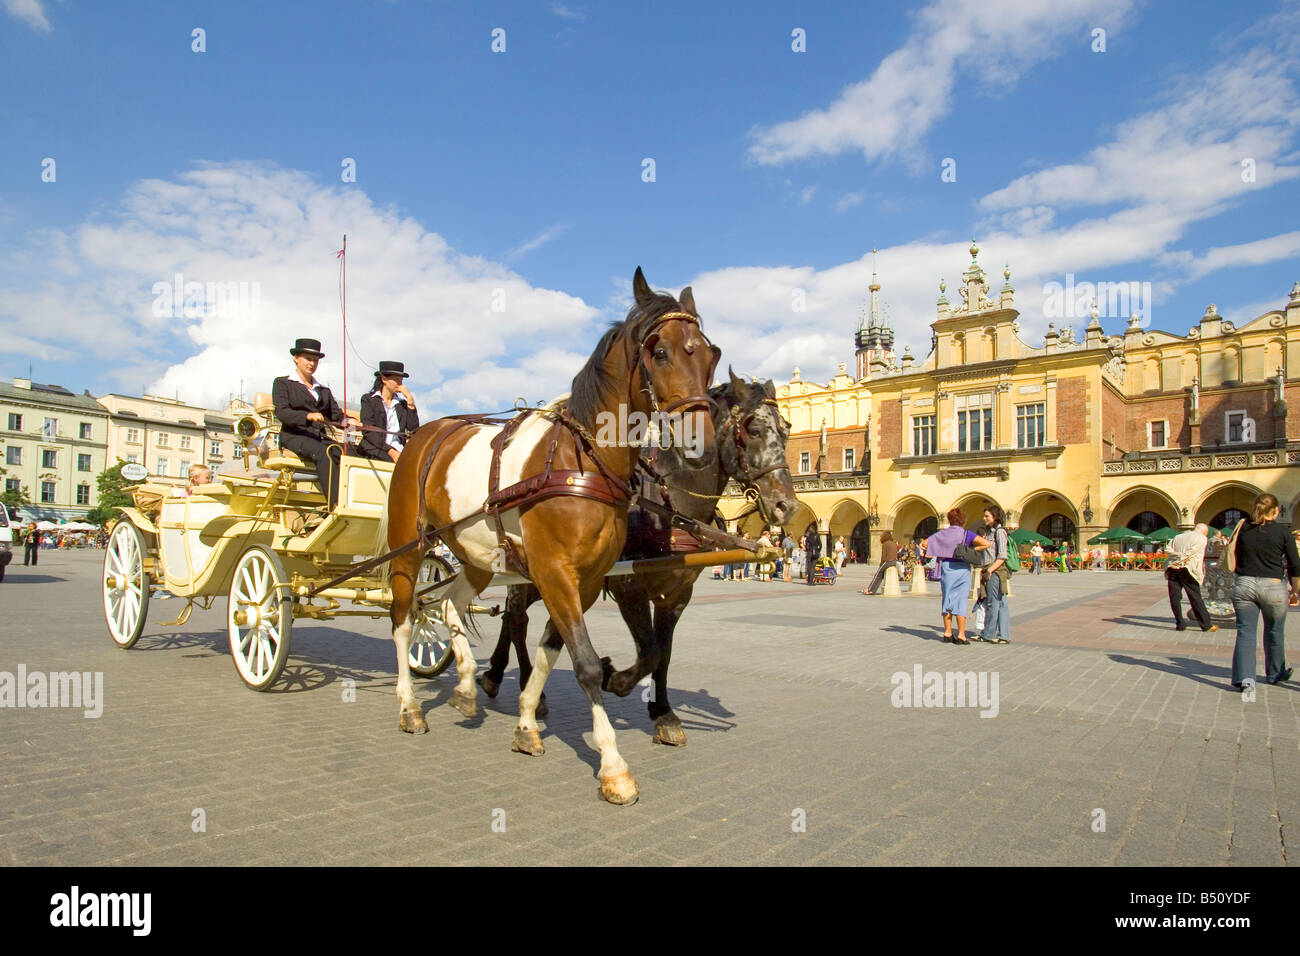 A tourist horse drawn carriage in the Main Market Square of Krakow in Poland with the Sukiennice Cloth Hall behind right. Stock Photo